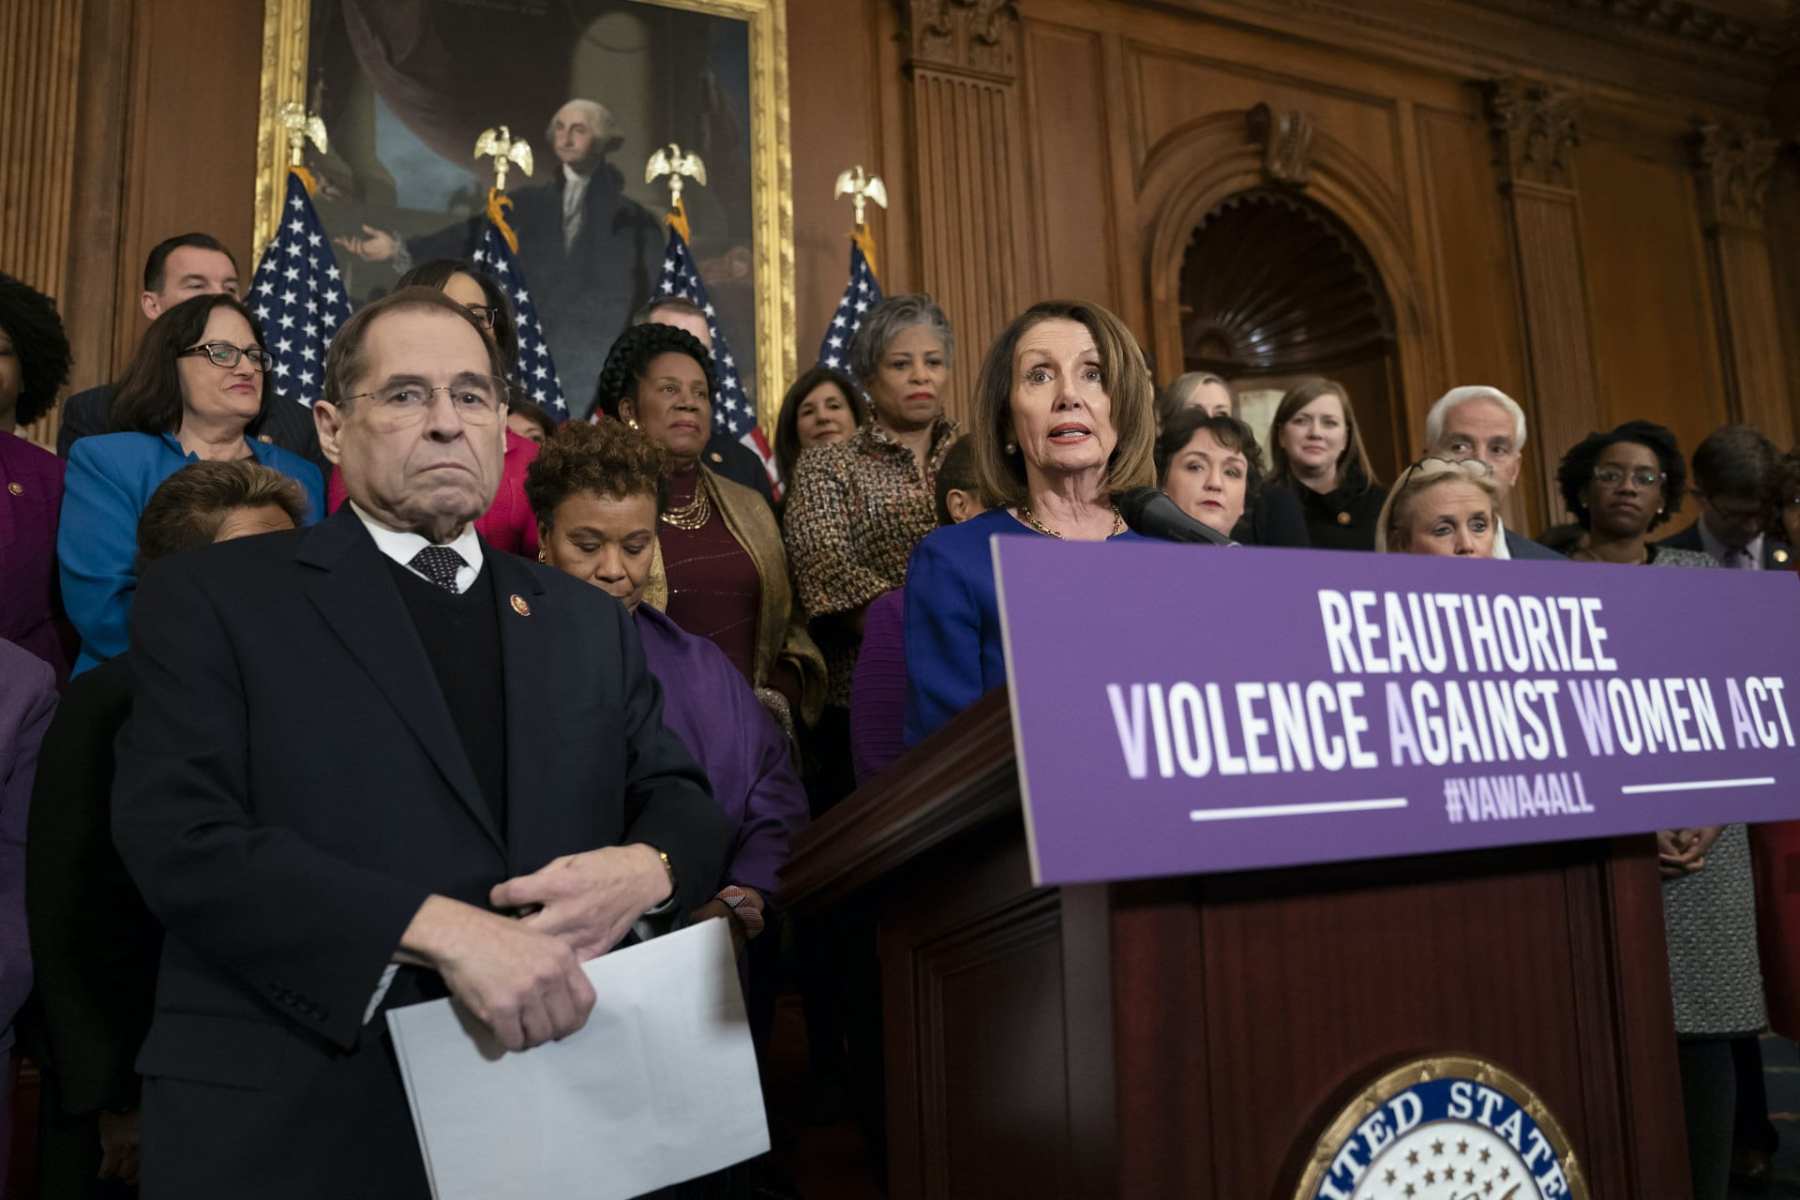 Nancy Pelosi and other legislators stand at a podium that reads "Reauthorize Violence Against Women Act"